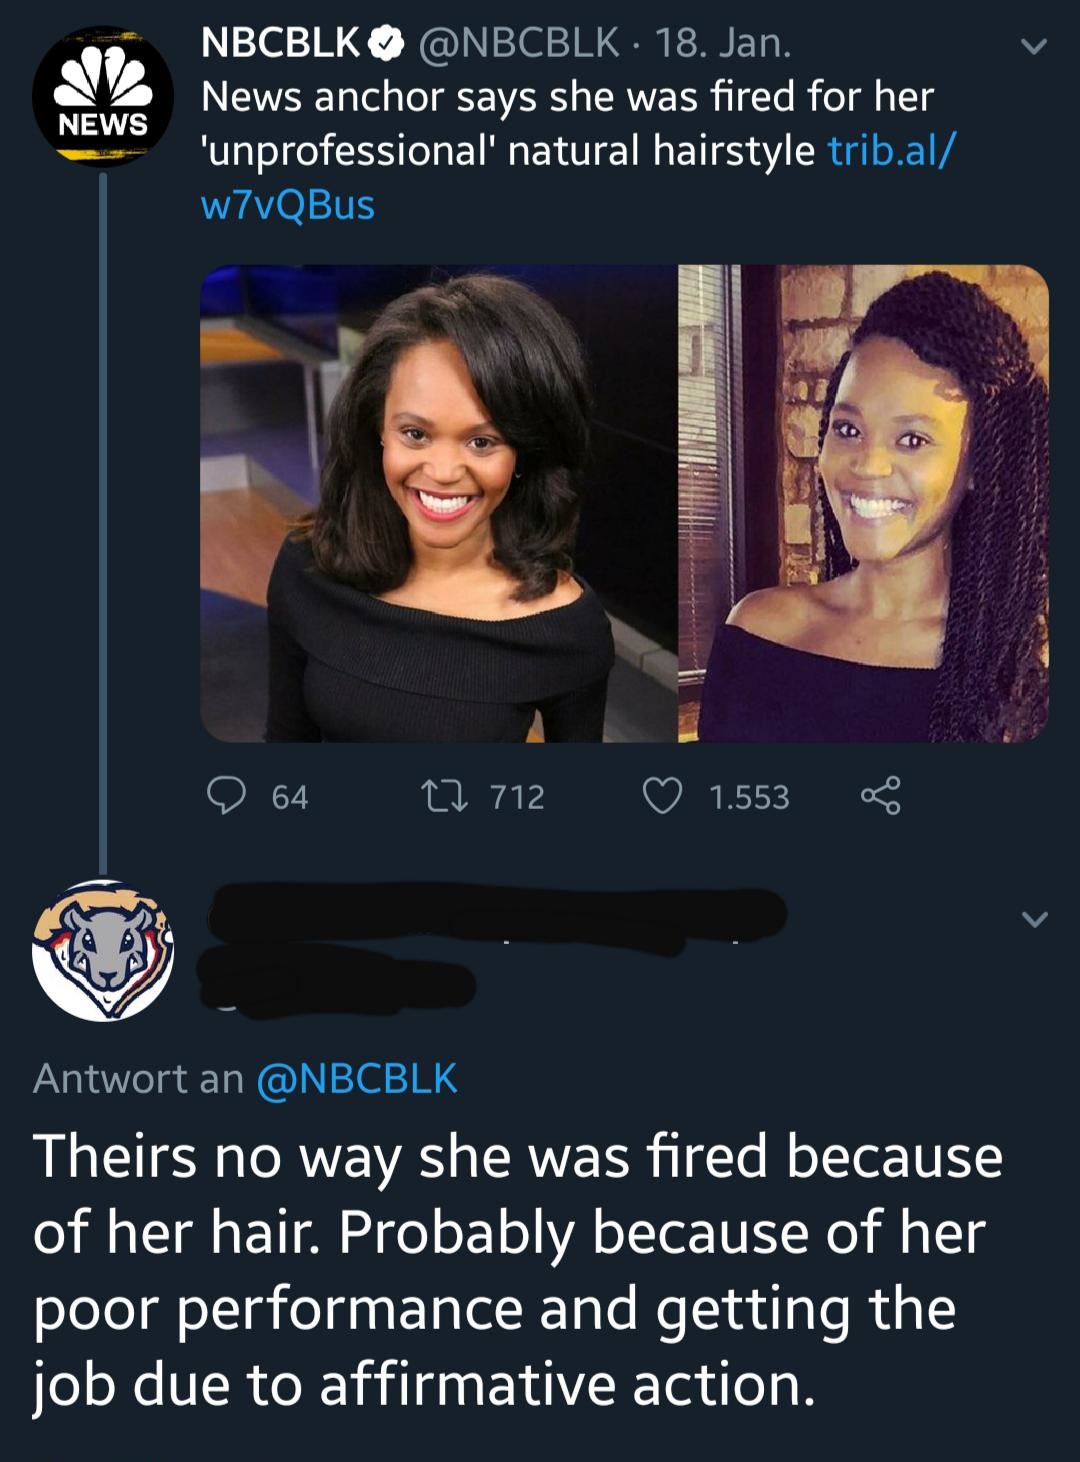 black hair - News Nbcblk 18. Jan. News anchor says she was fired for her "unprofessional' natural hairstyle trib.al w7vQBus O 64 712 1.553 Antwort an Theirs no way she was fired because of her hair. Probably because of her poor performance and getting the